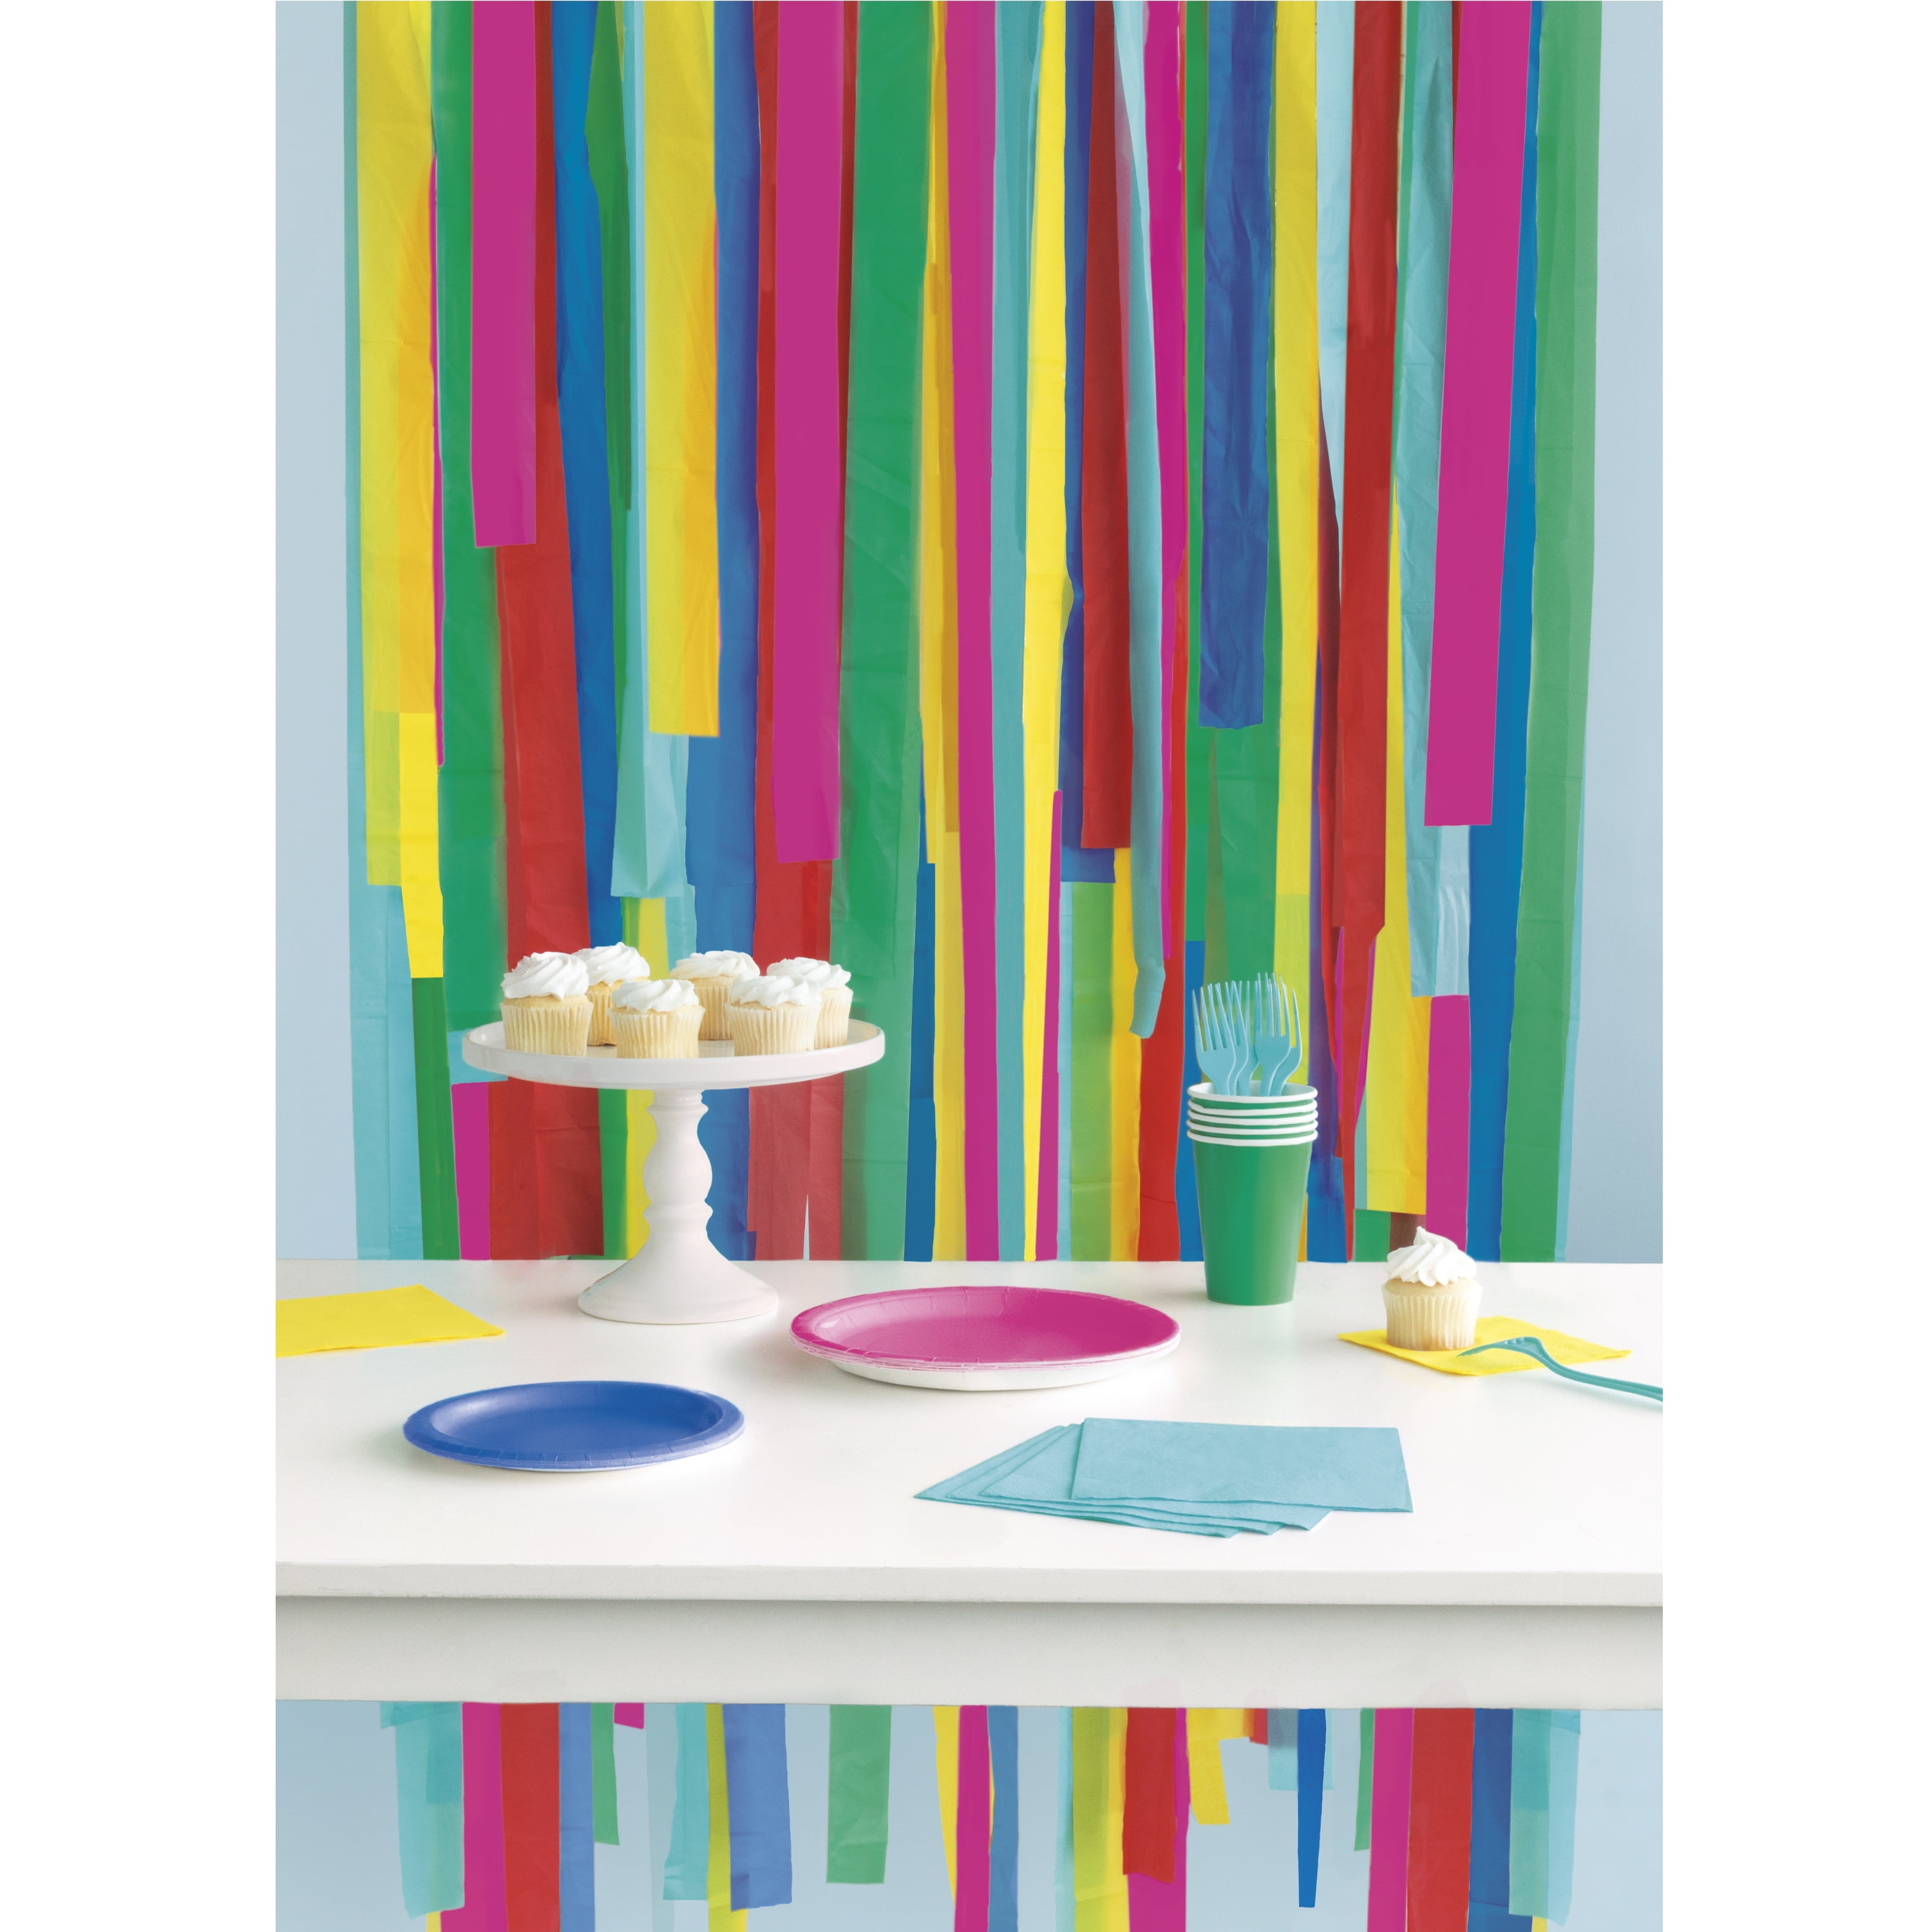 Vibrant Rainbow Retro Room Decorating Kit - Pack of 12 - Versatile & Long  lasting Paper Decorations, Unique & Eye-catching Party Accessory - Perfect